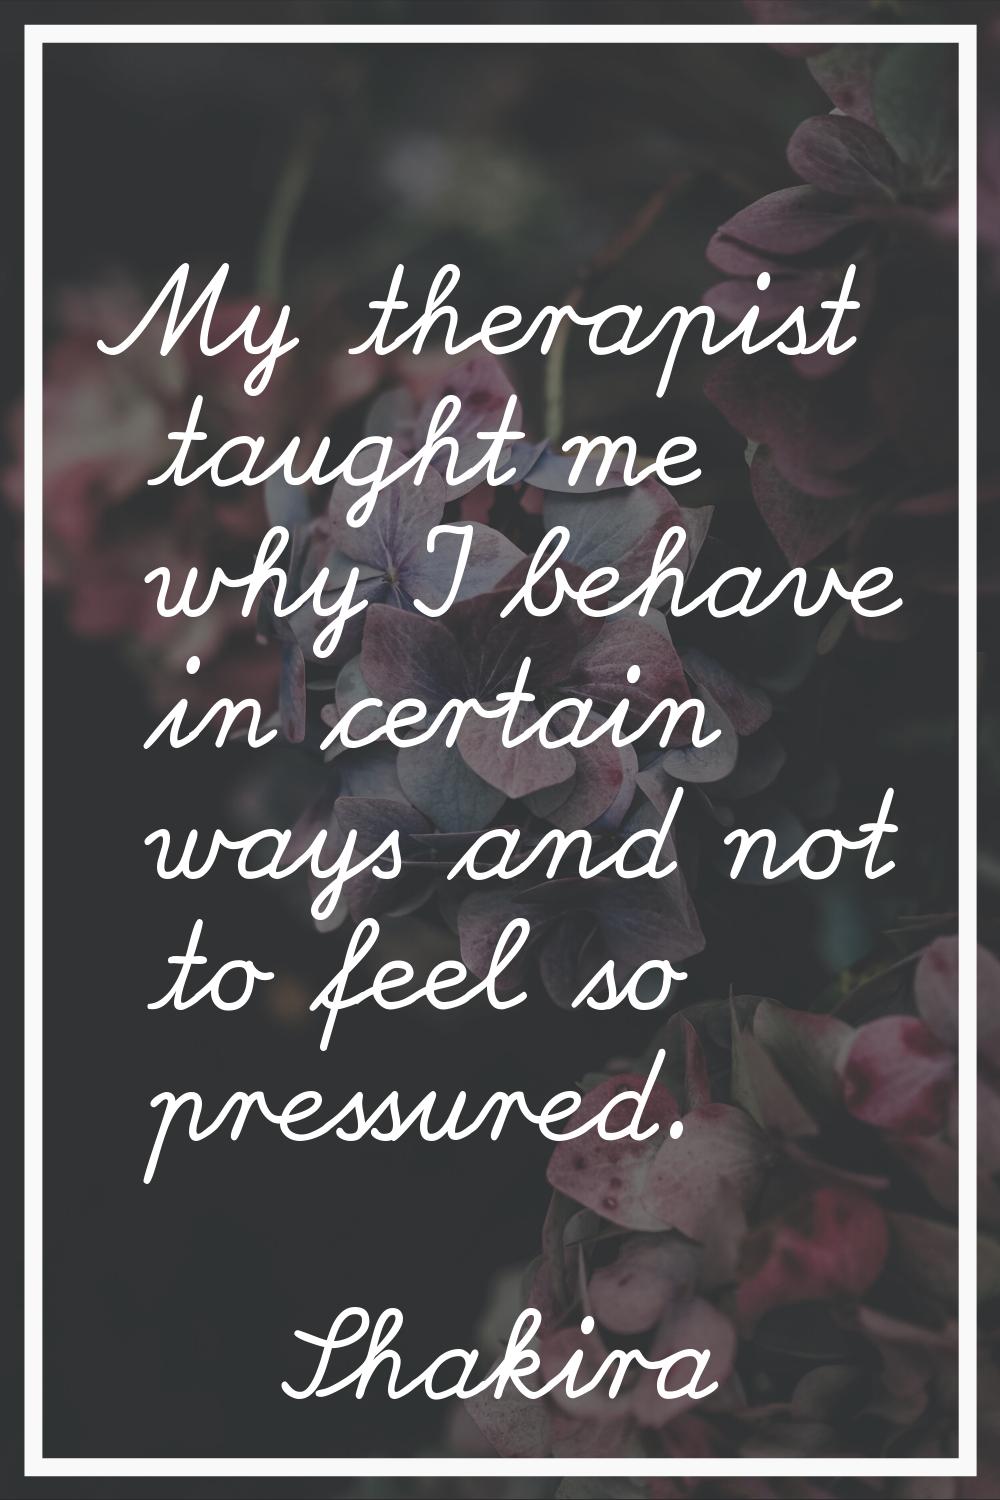 My therapist taught me why I behave in certain ways and not to feel so pressured.